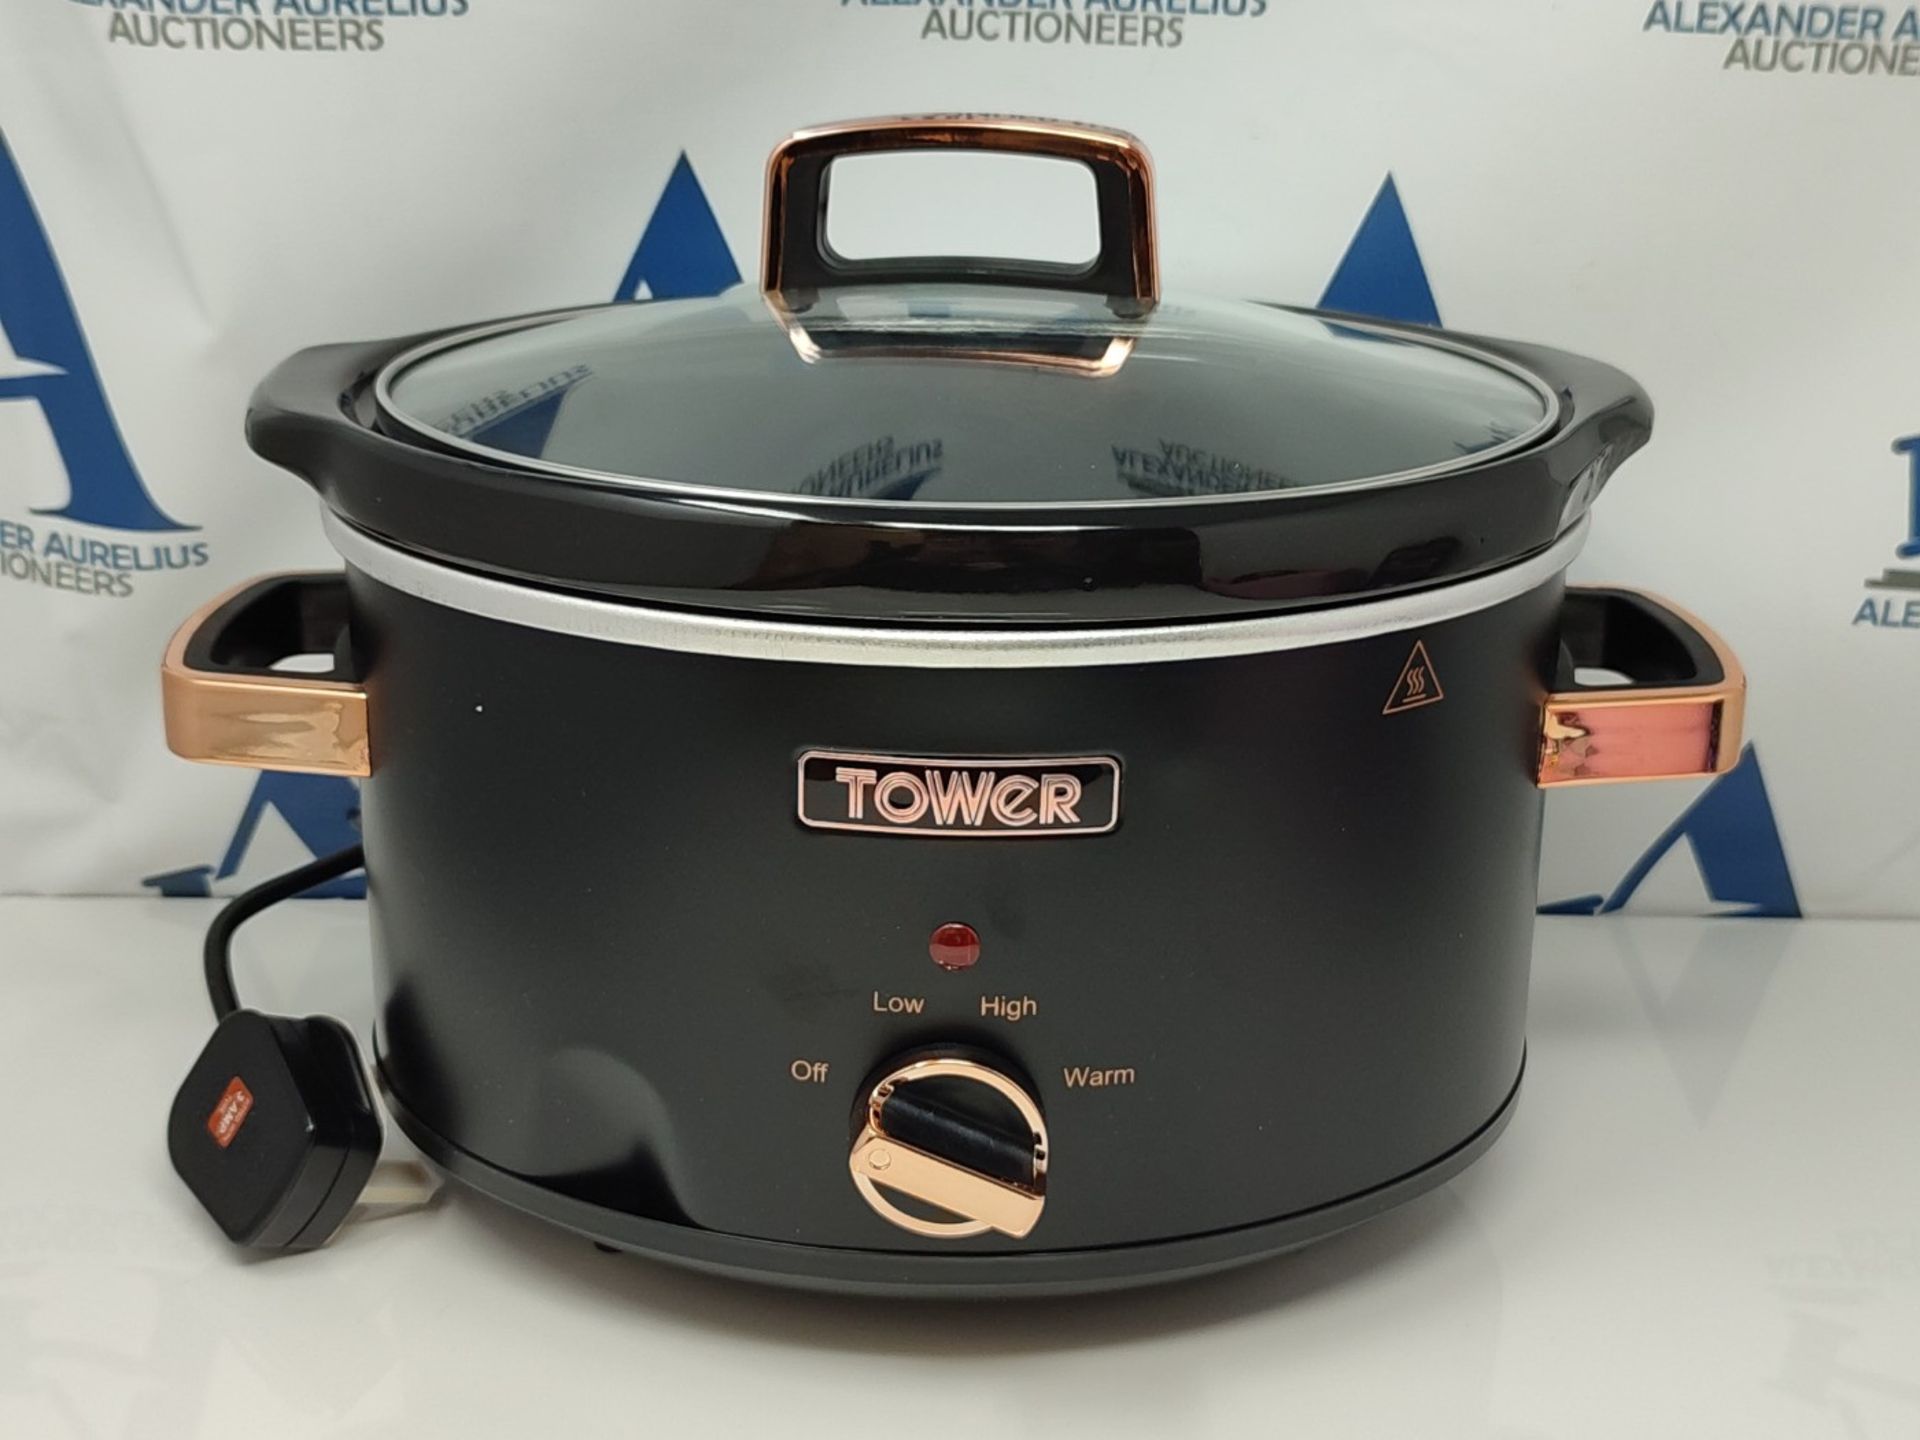 Tower T16042BLK Cavaletto 3.5 Litre Slow Cooker with 3 Heat Settings, Removable Pot an - Image 3 of 3